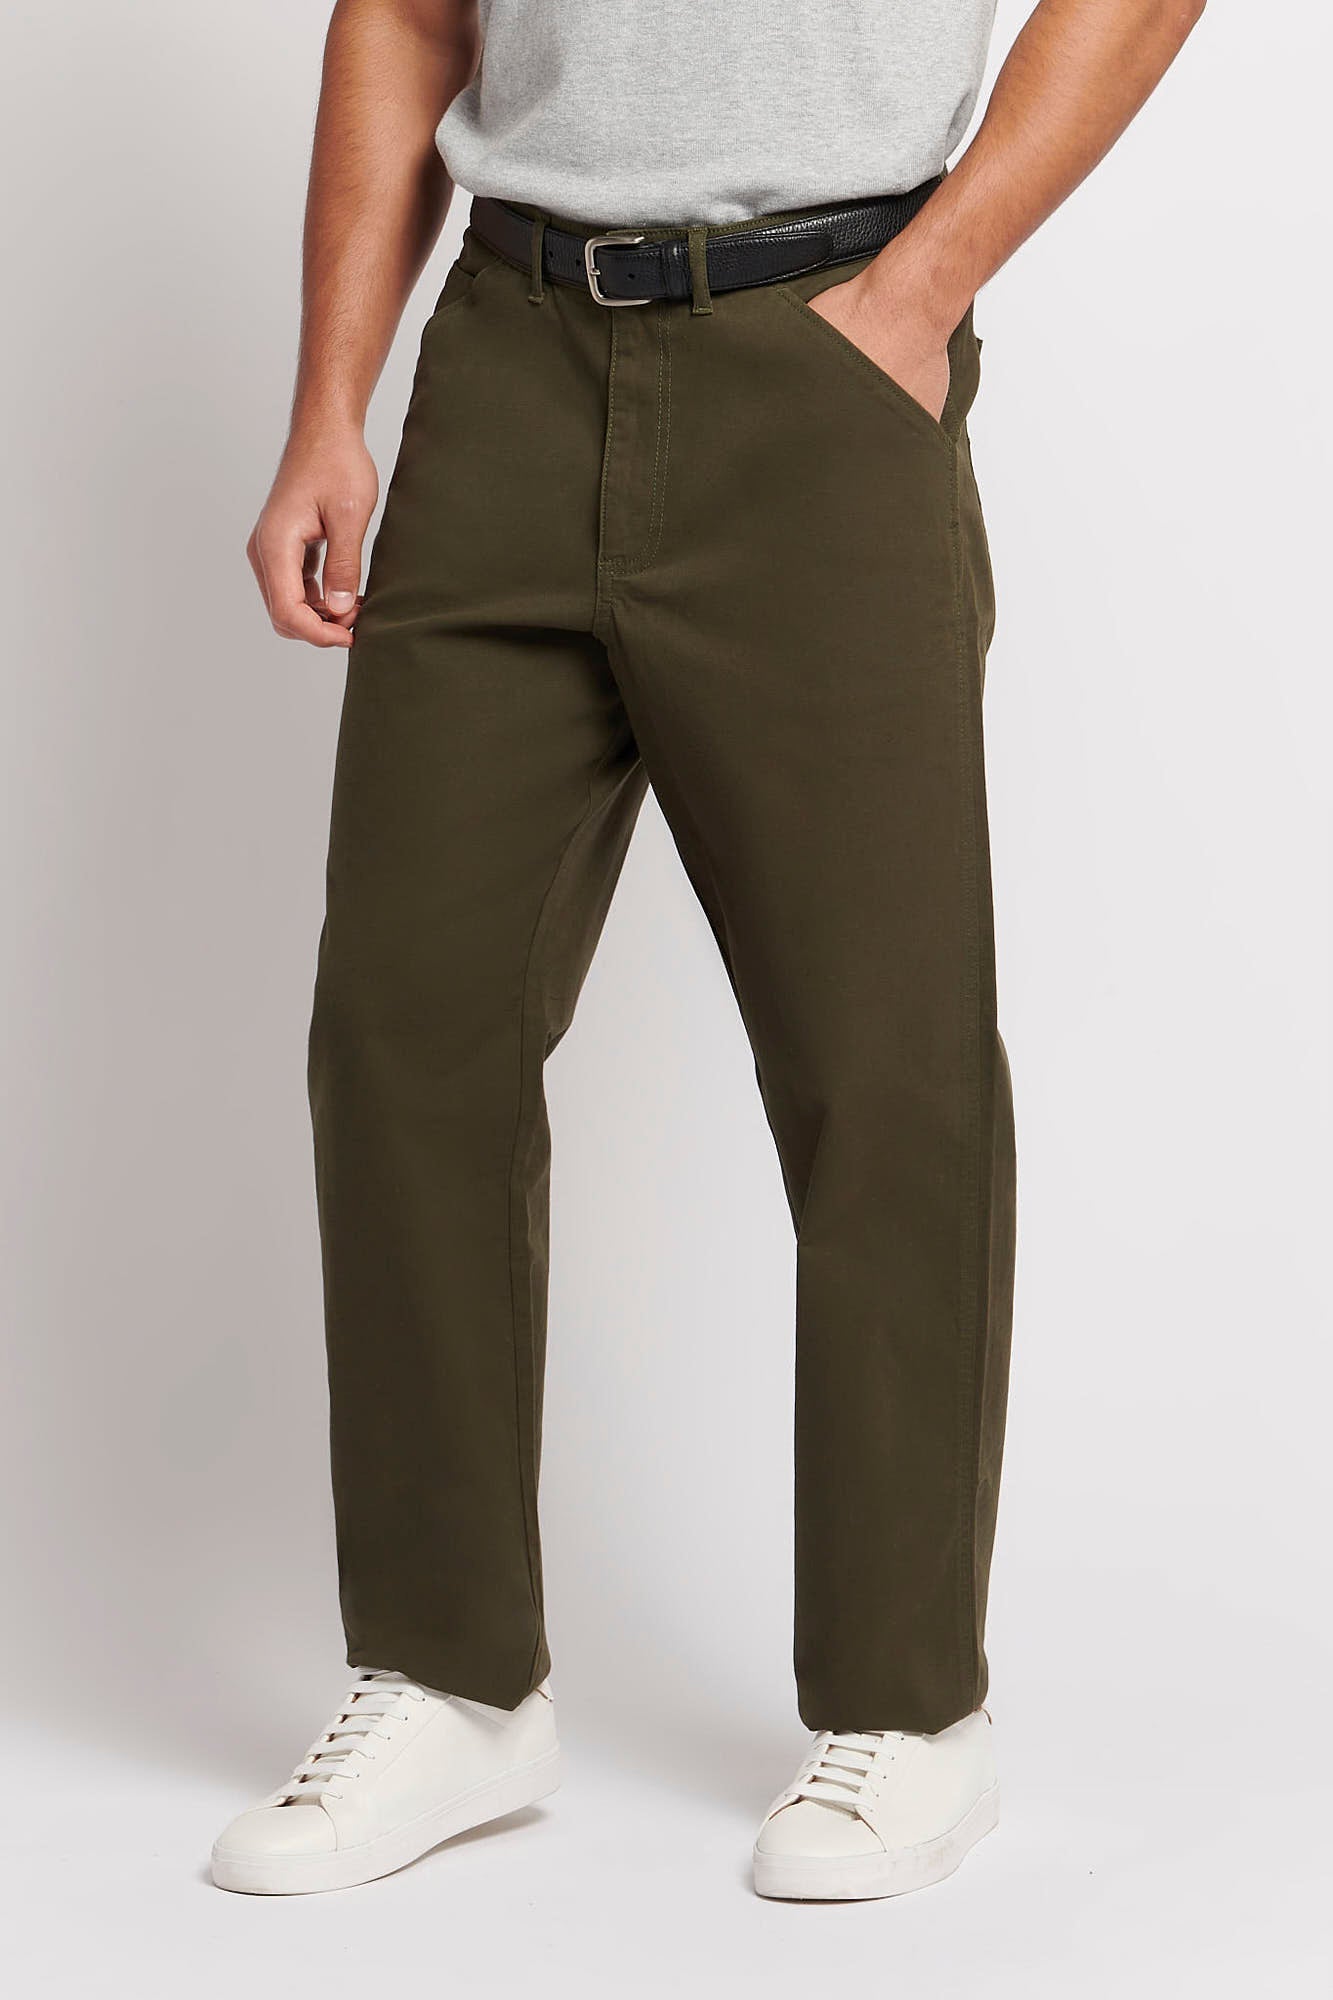 U.S. Polo Assn. Mens Worker Trousers in Forest Night